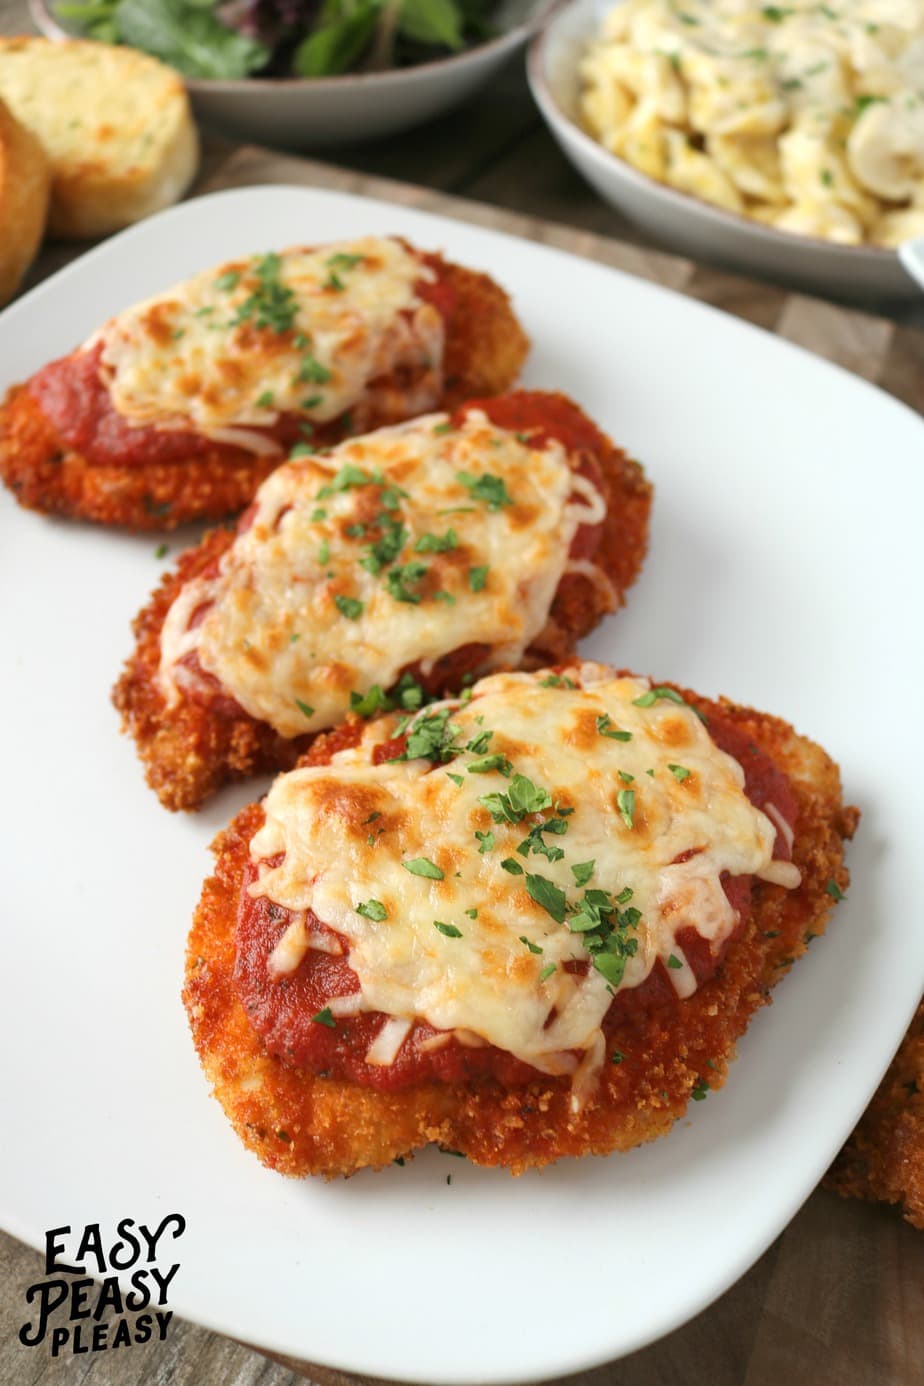 Easy Chicken Parmesan Recipe that is kid approved and the family devours.